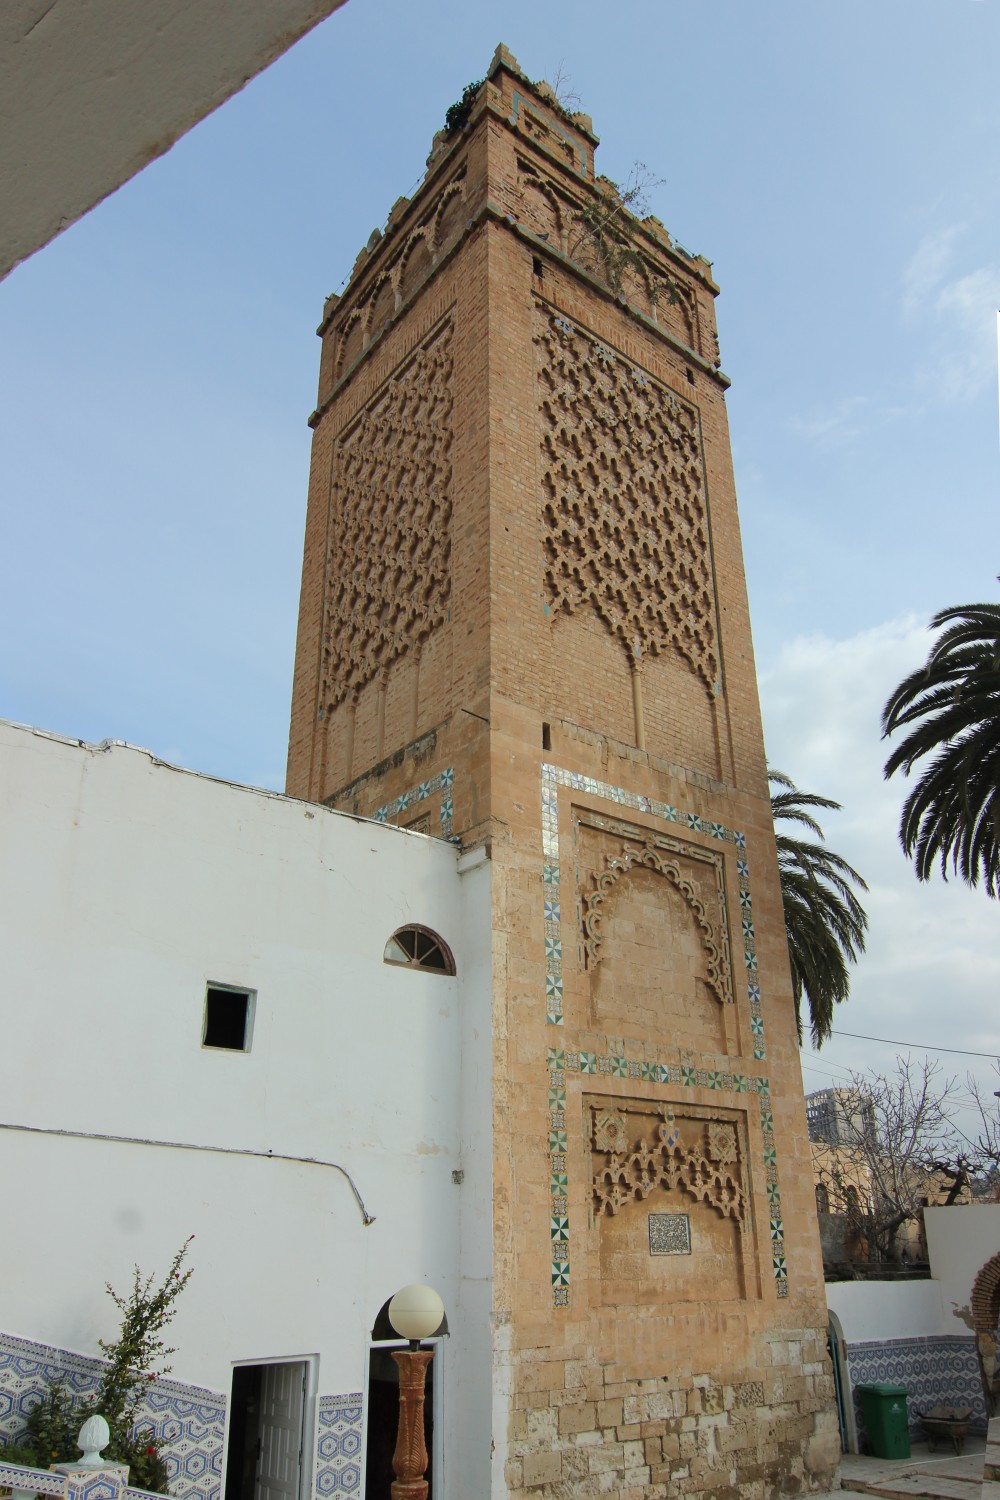 Full view of the minaret from south-west showing diamond patterns, lambrequin and lobed arches